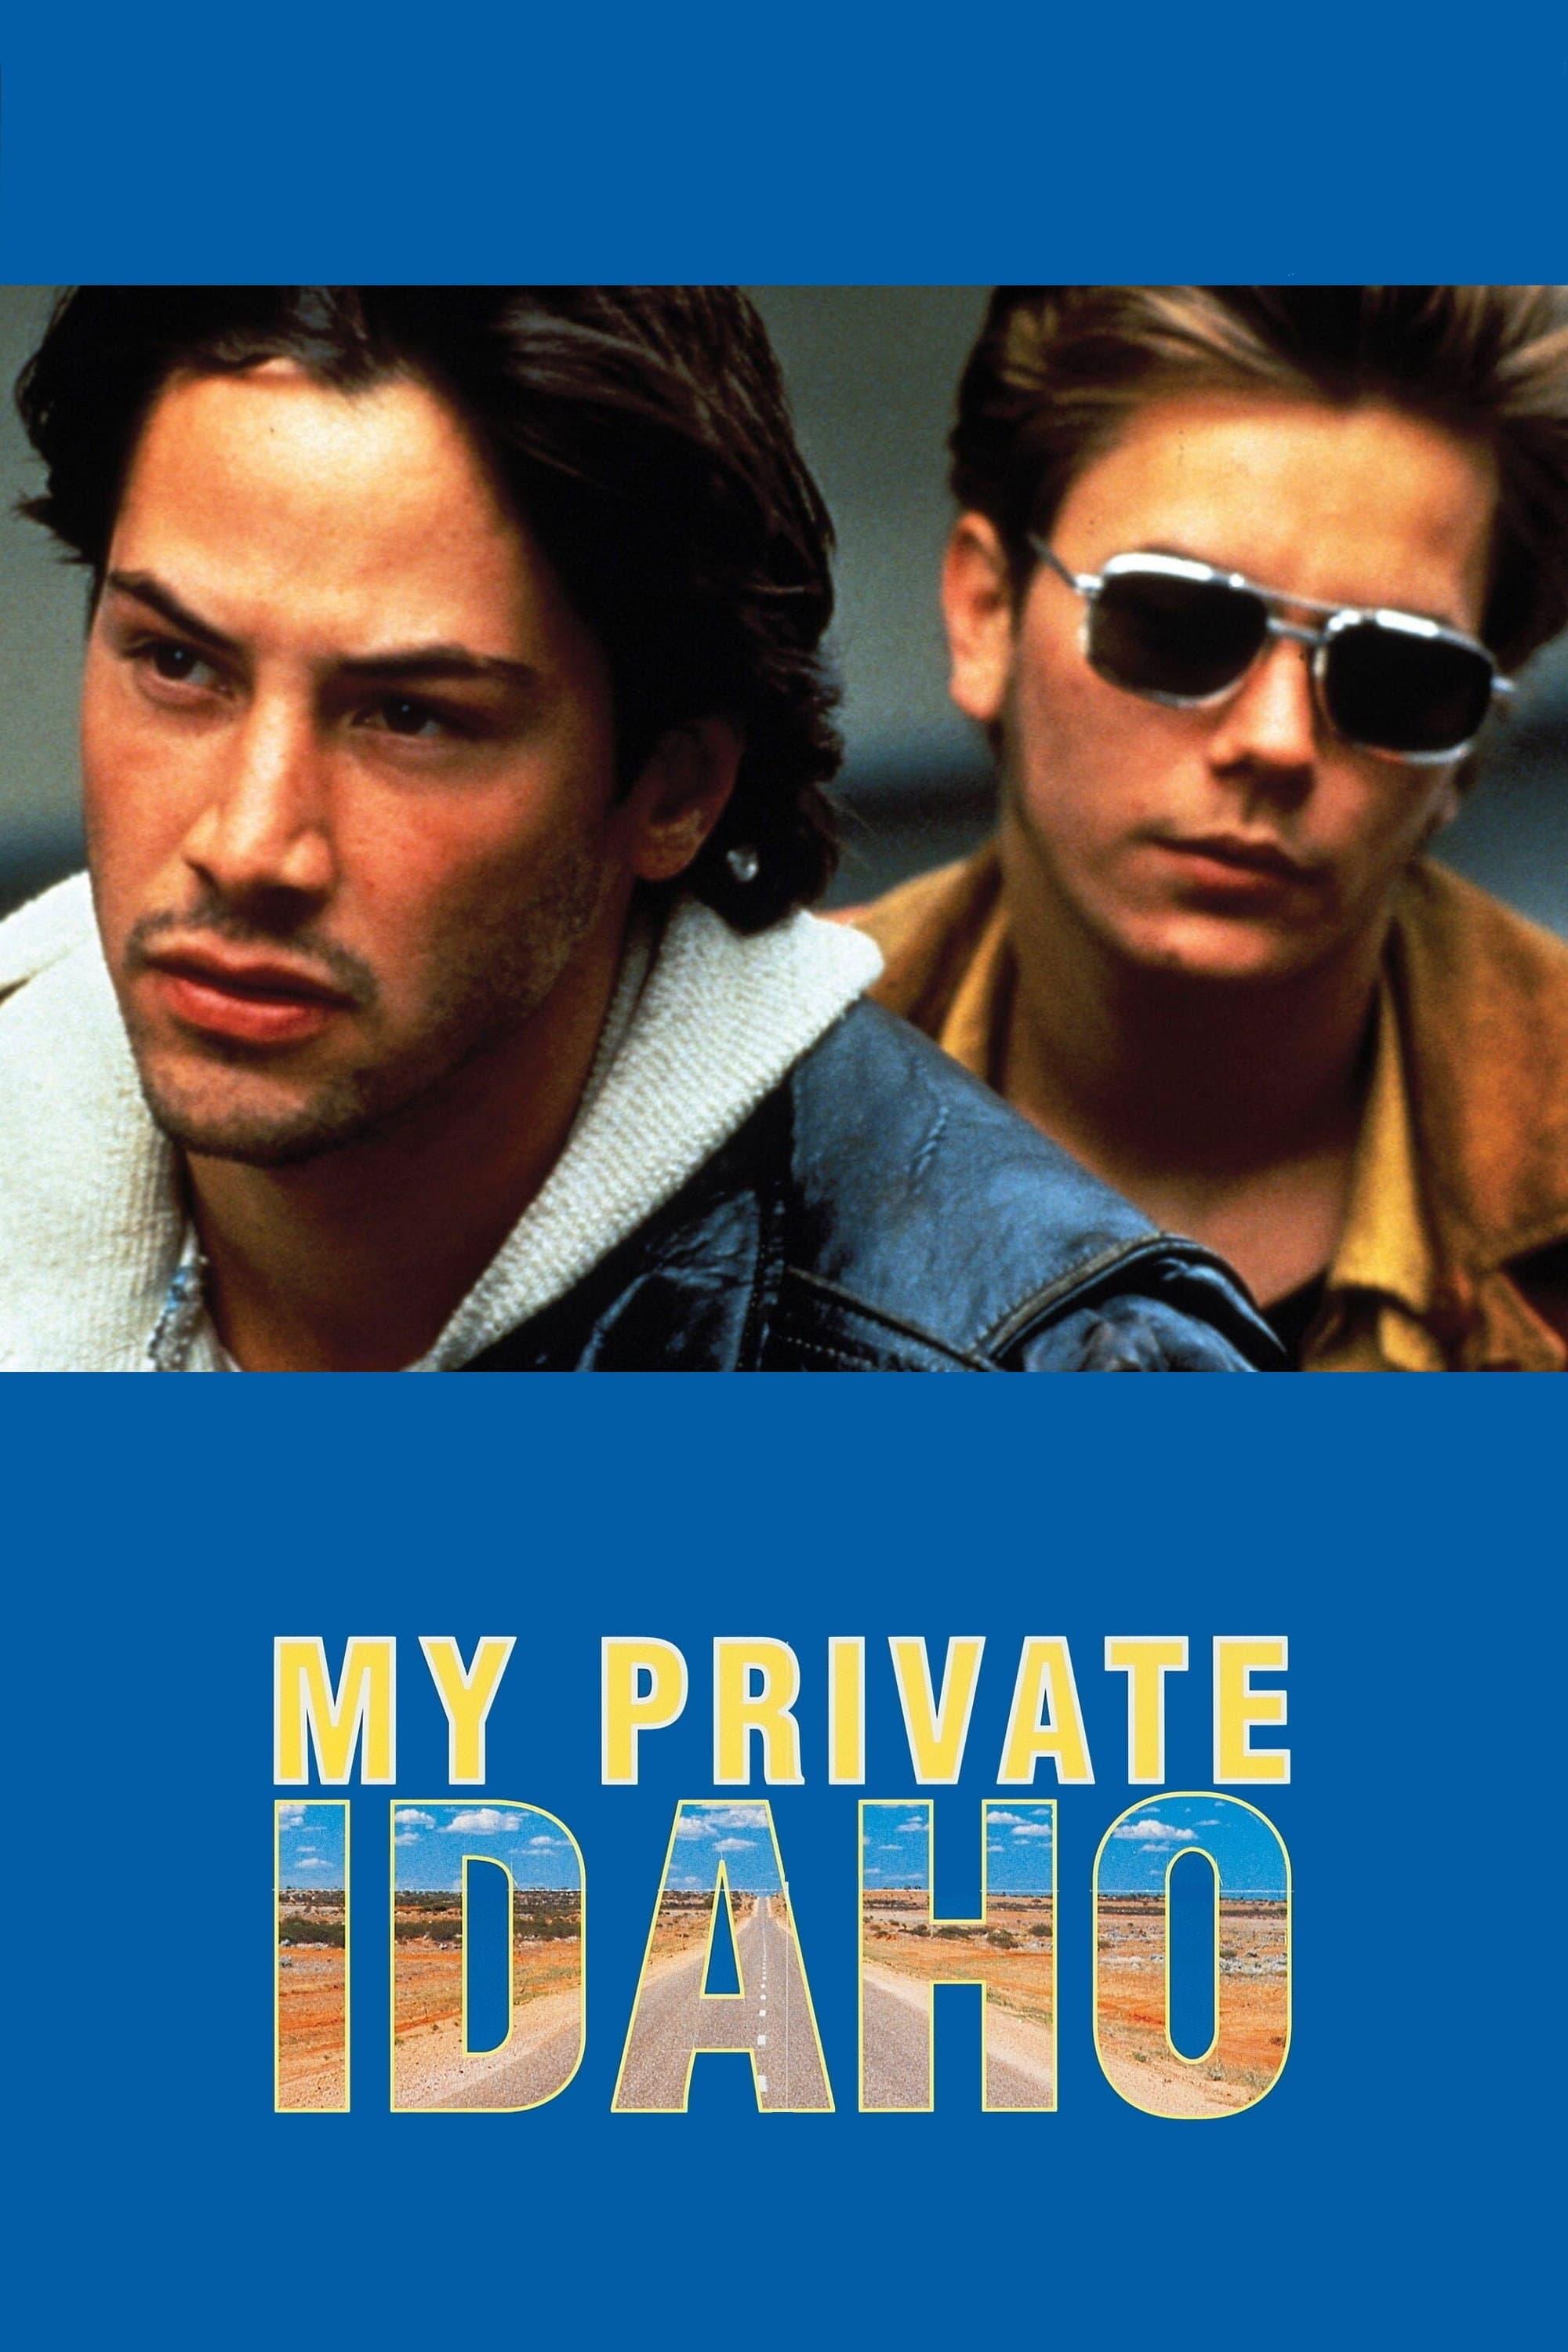 My Private Idaho poster